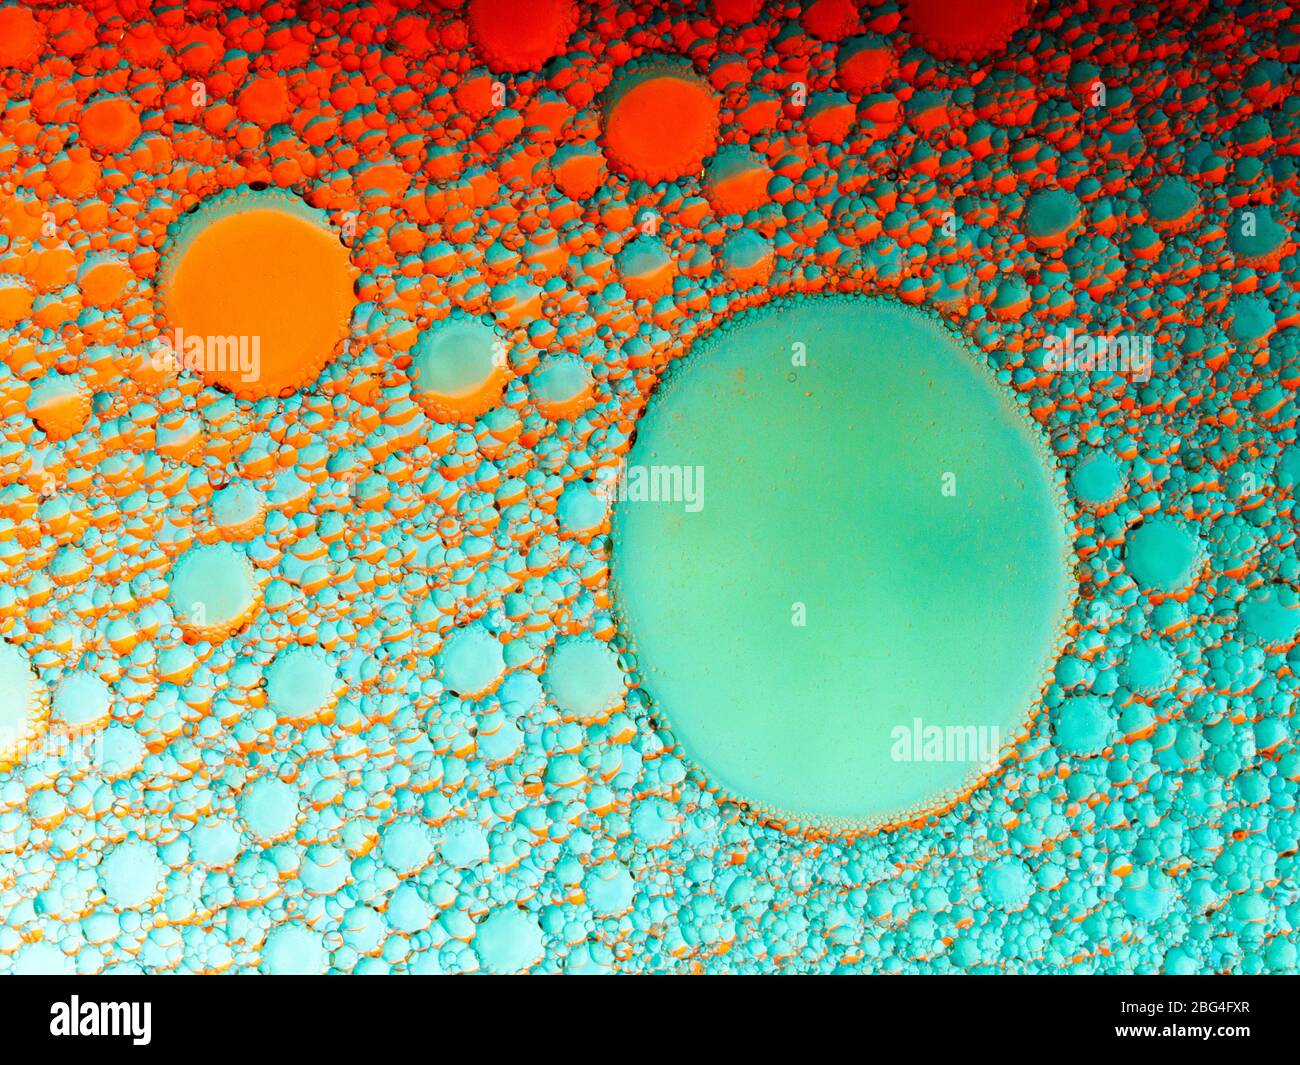 Oil and soap bubbles in water Stock Photo